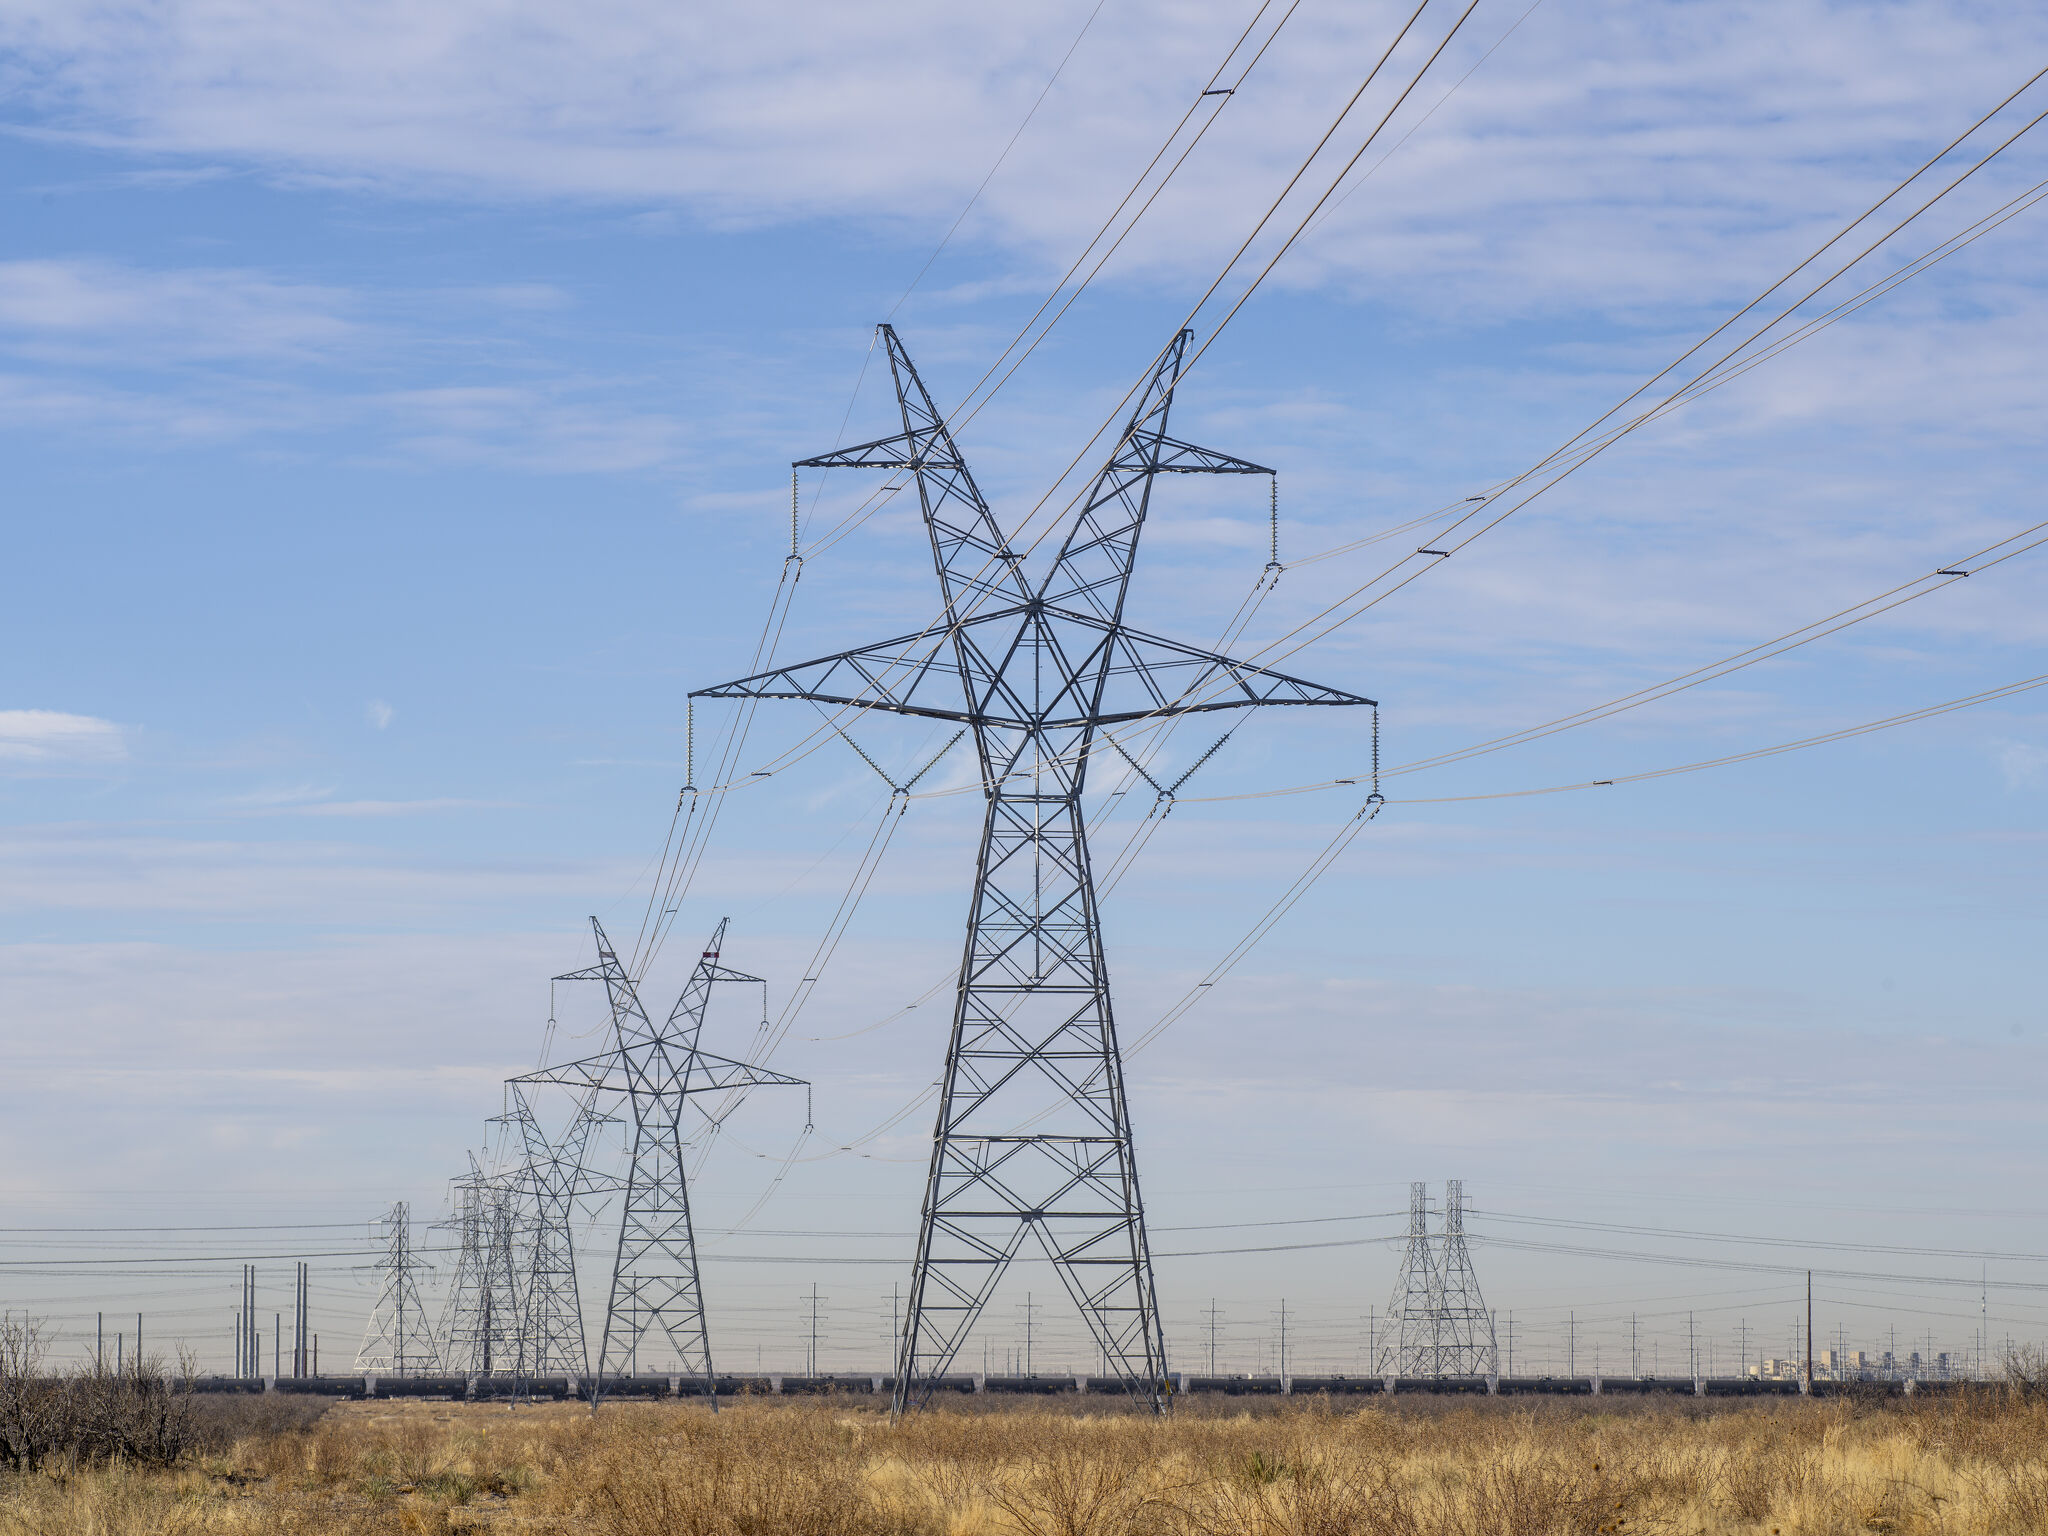  Texas electricity prices have risen 70 percent in last year—and it's not even summer yet 